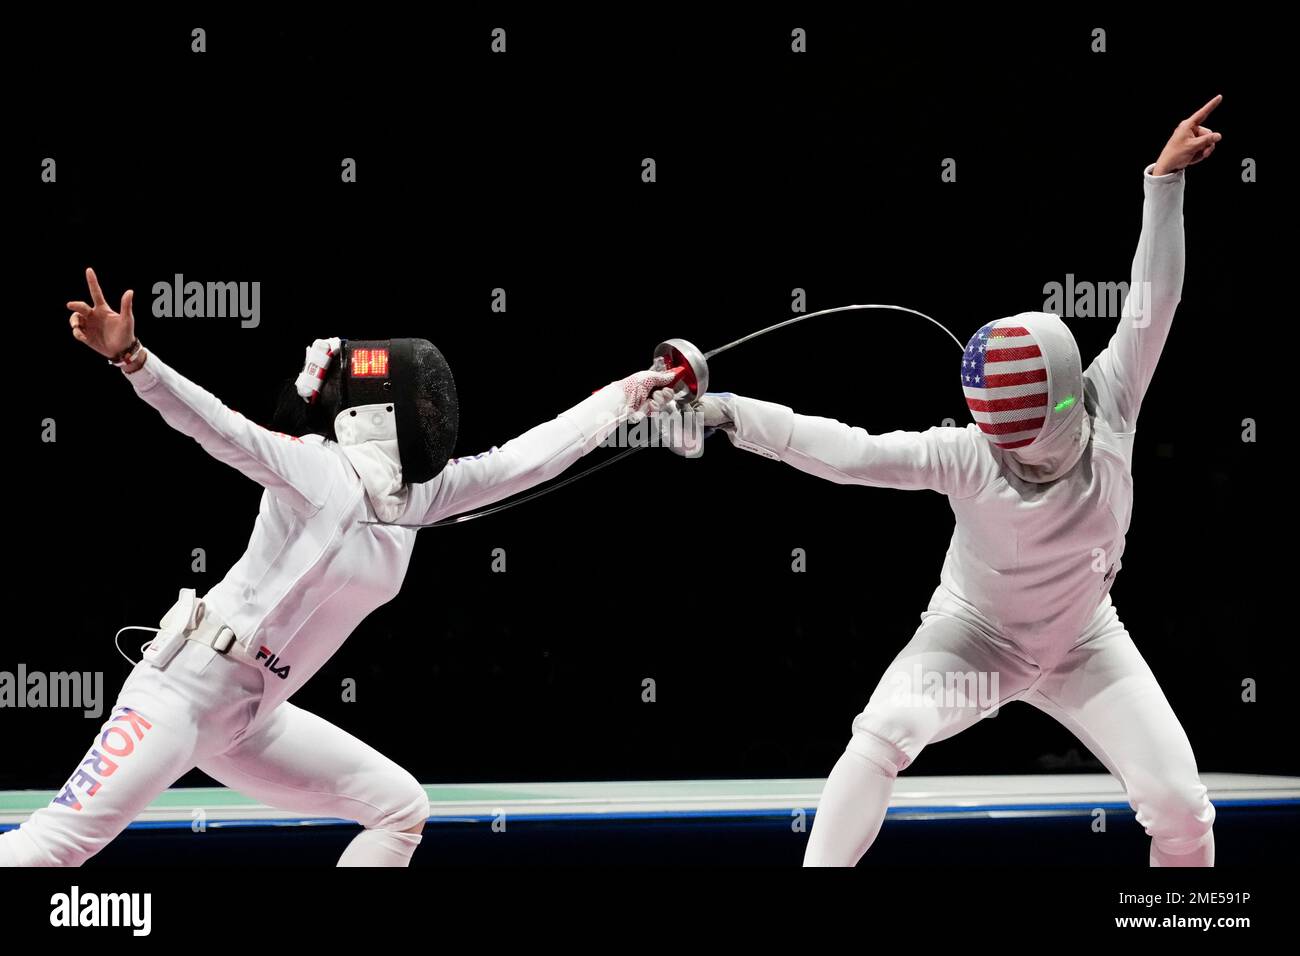 https://c8.alamy.com/comp/2ME591P/song-sera-of-south-korea-left-and-katharine-holmes-of-the-united-states-compete-in-the-womens-individual-epee-round-of-32-competition-at-the-2020-summer-olympics-saturday-july-24-2021-in-chiba-japan-ap-photoandrew-medichini-2ME591P.jpg